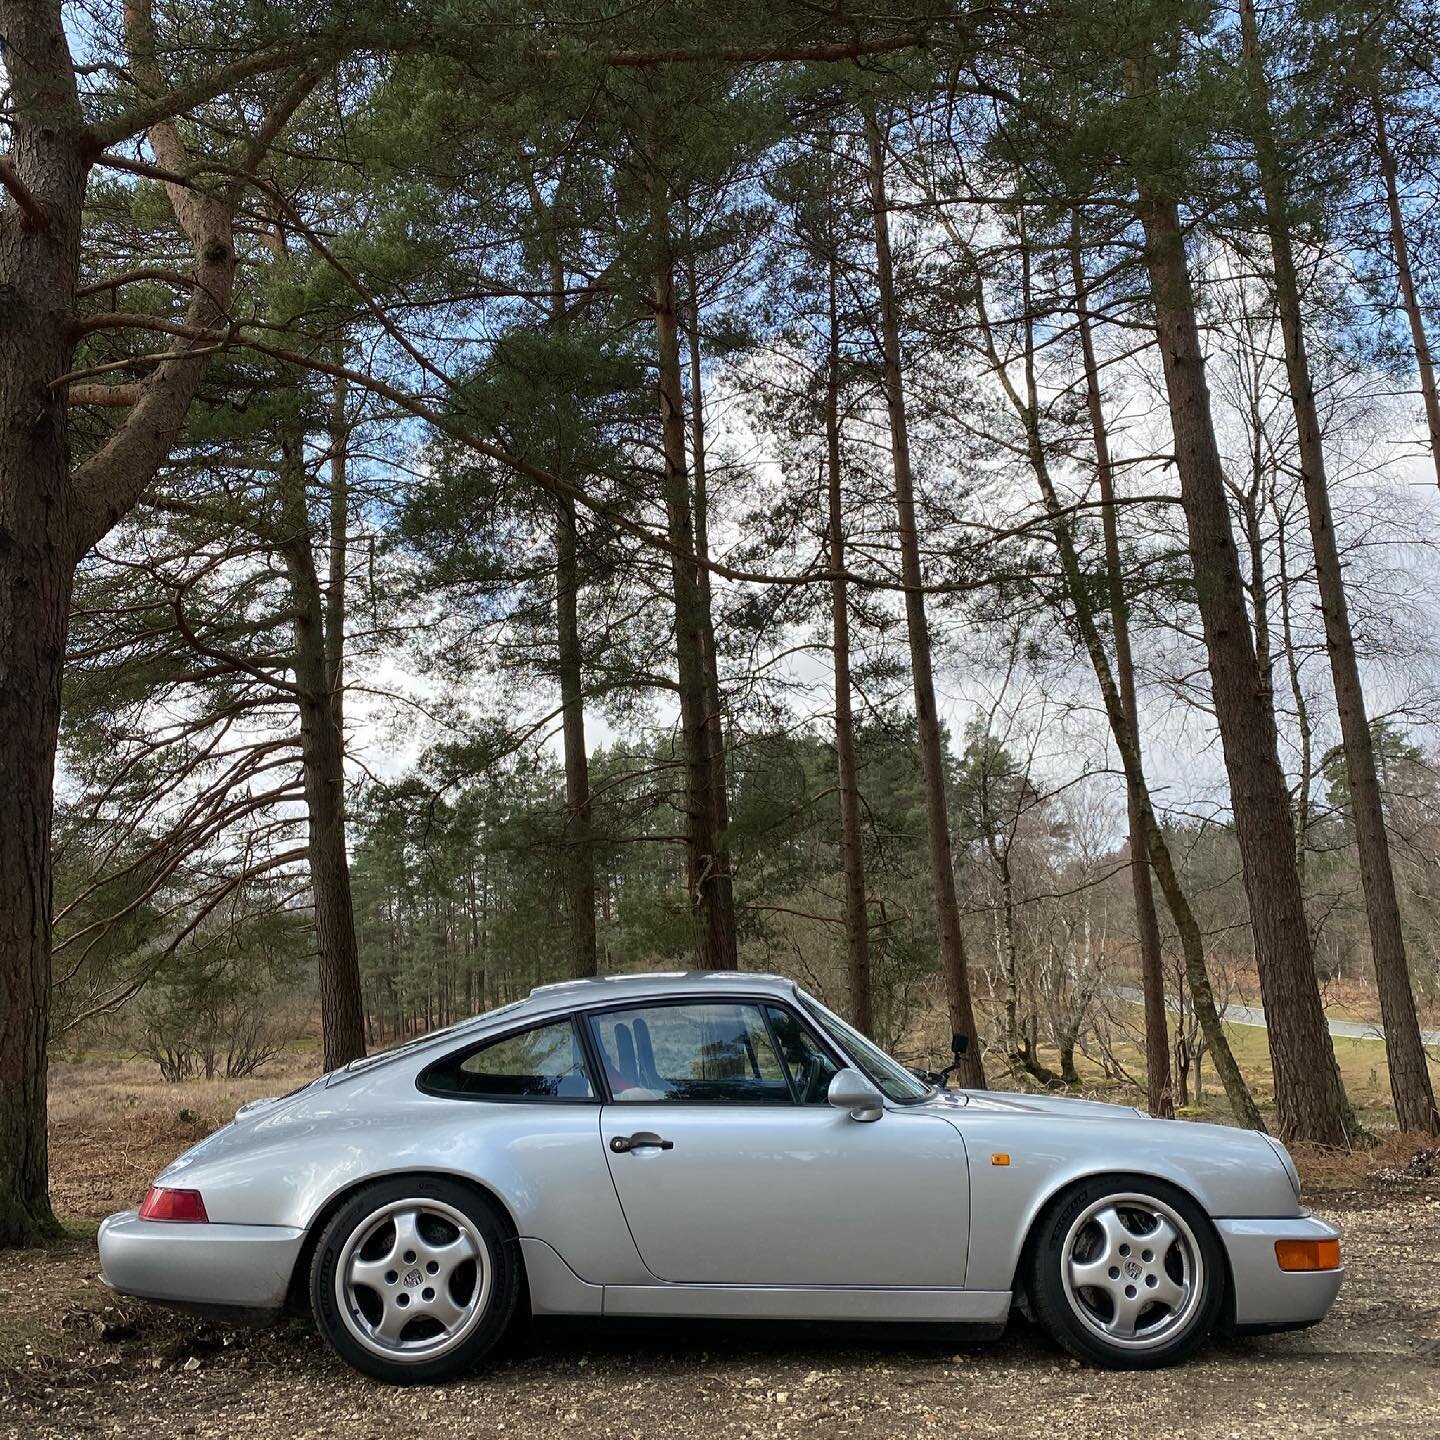 Tell me it&rsquo;s not the purest 911 profile - I dare you!

Cheapest 964RS in the UK
Available right now from @ashgood_porsche